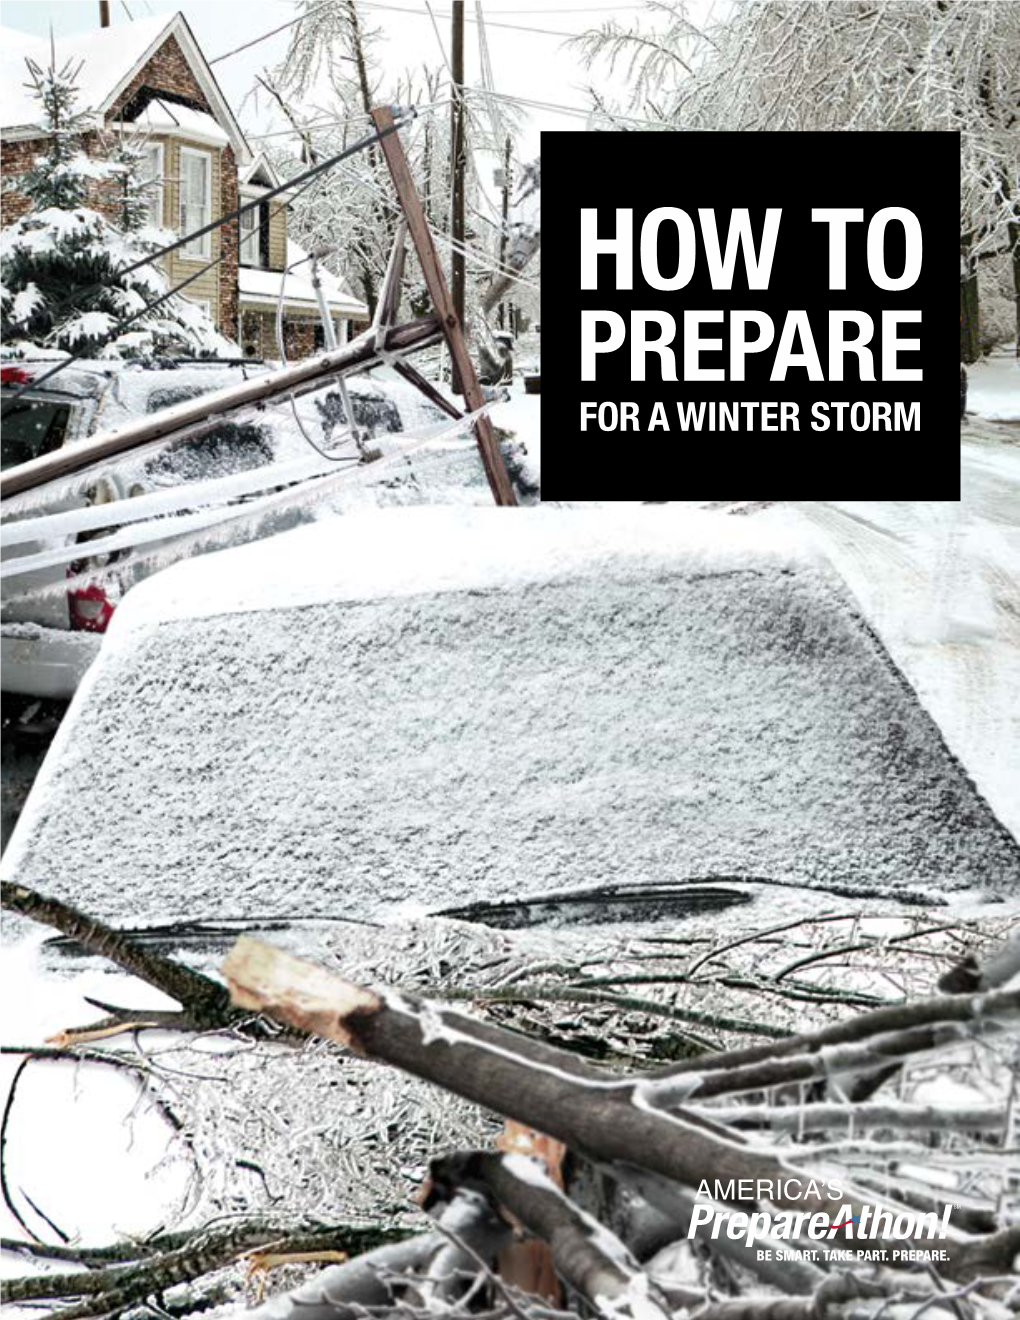 HOW to PREPARE for a WINTER STORM How to Prepare for a Winter Storm Winter Storms Can Bring Freezing Rain, Ice, Snow, High Winds, Or a Combination of These Conditions